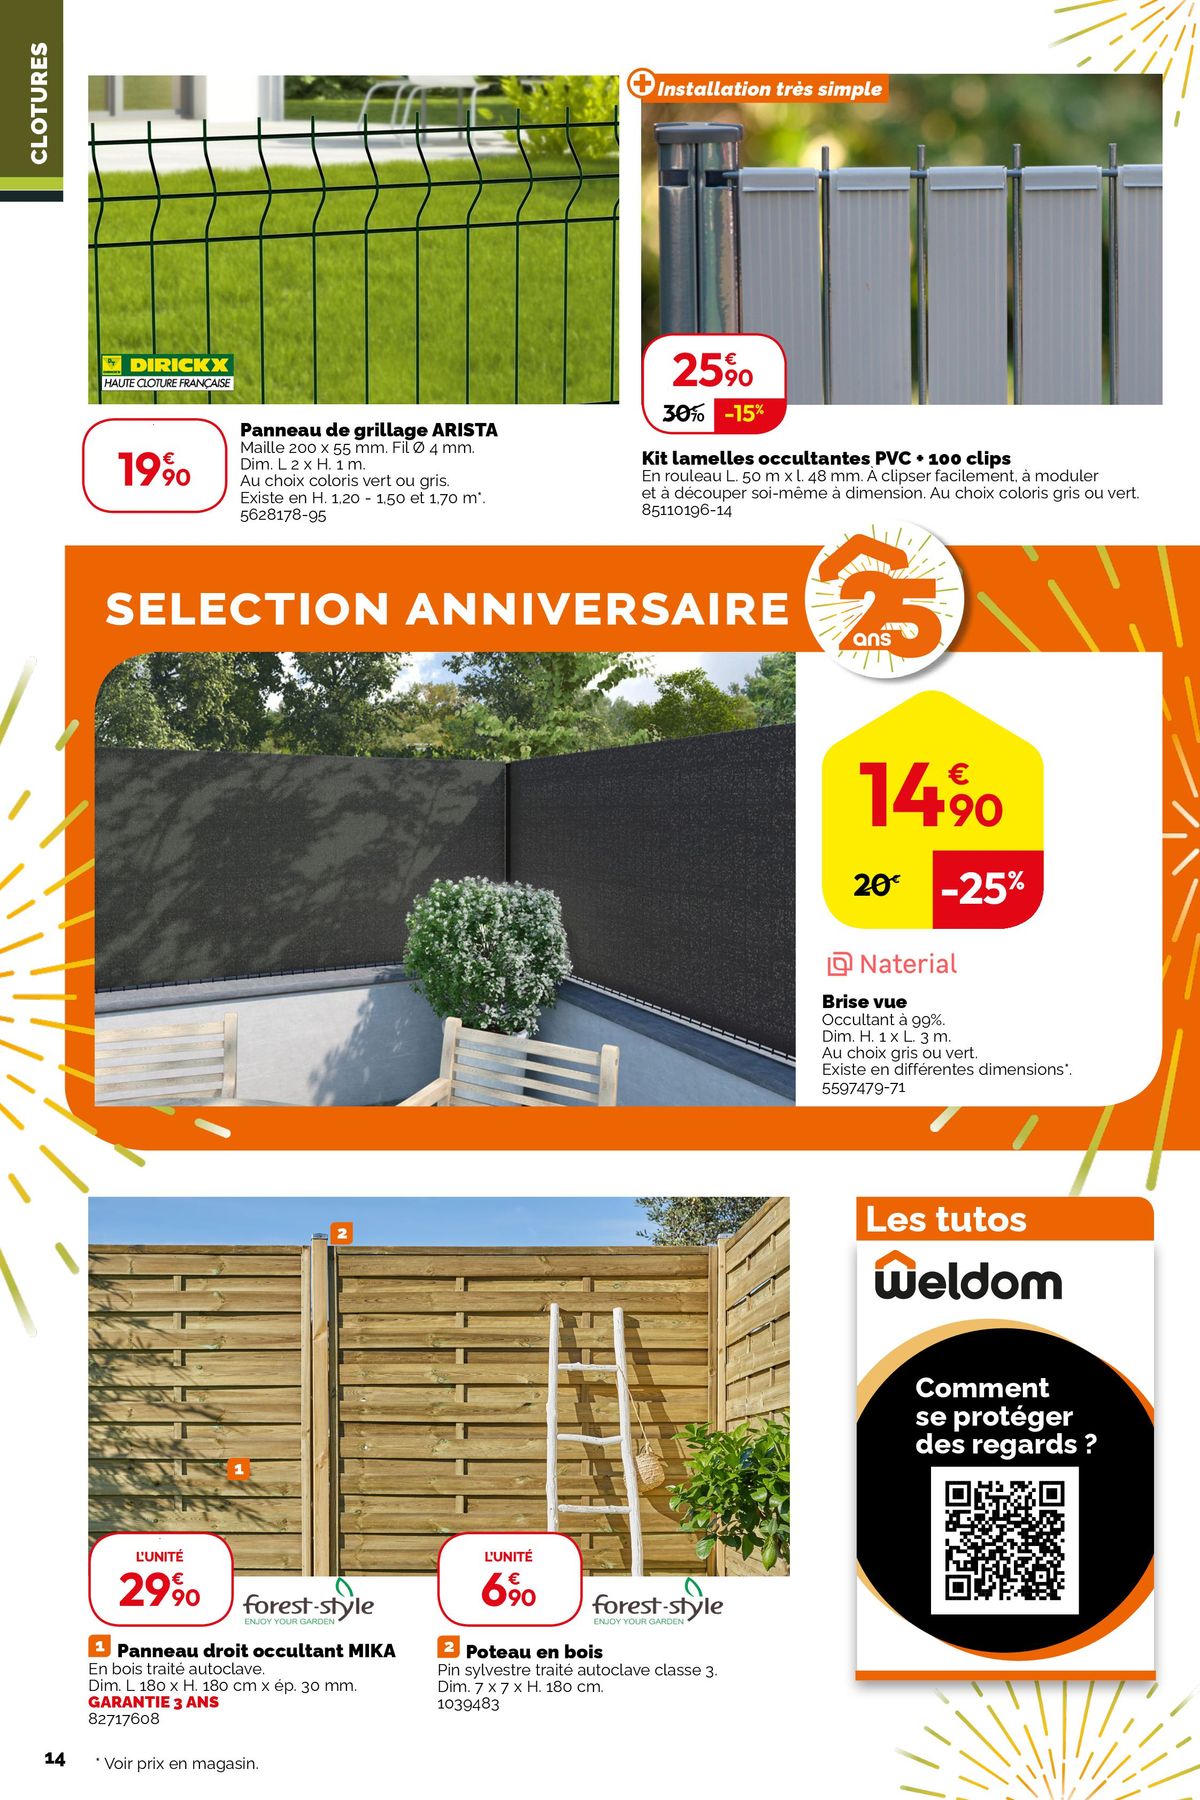 Catalogue 25 ans Weldom !, page 00014